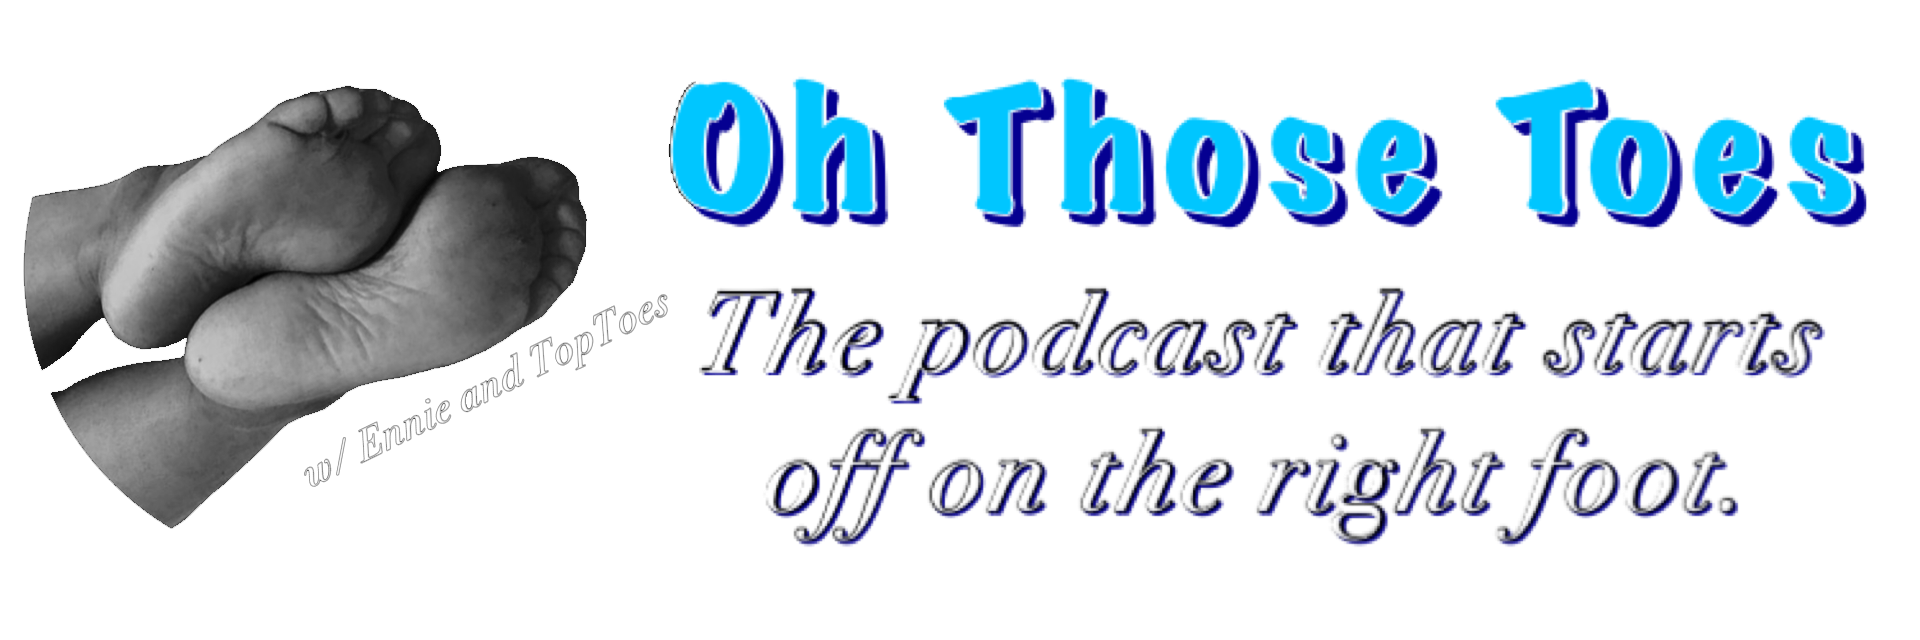 Oh Those Toes - Foot Fetish Podcast - The podcast that starts out on the right foot.